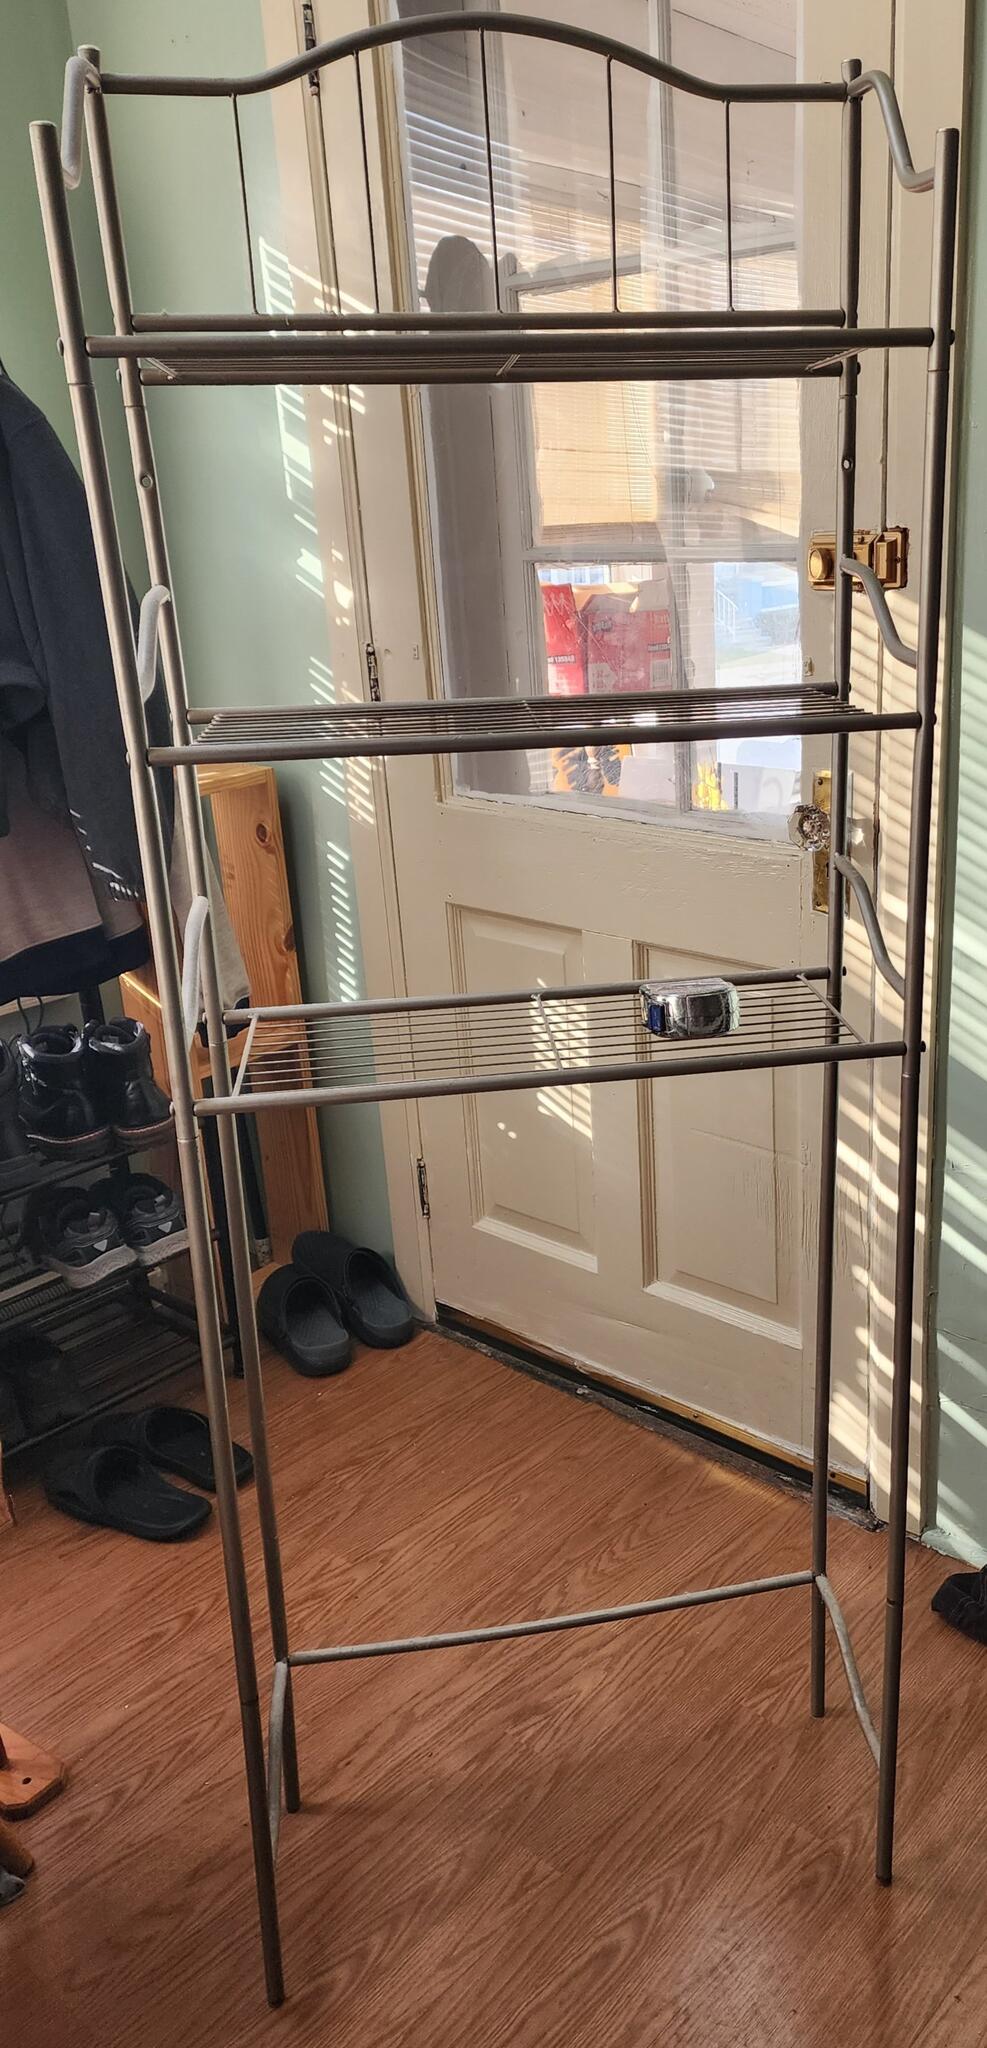 Over The Toilet Shelving for $10 in West York, PA | For Sale & Free ...